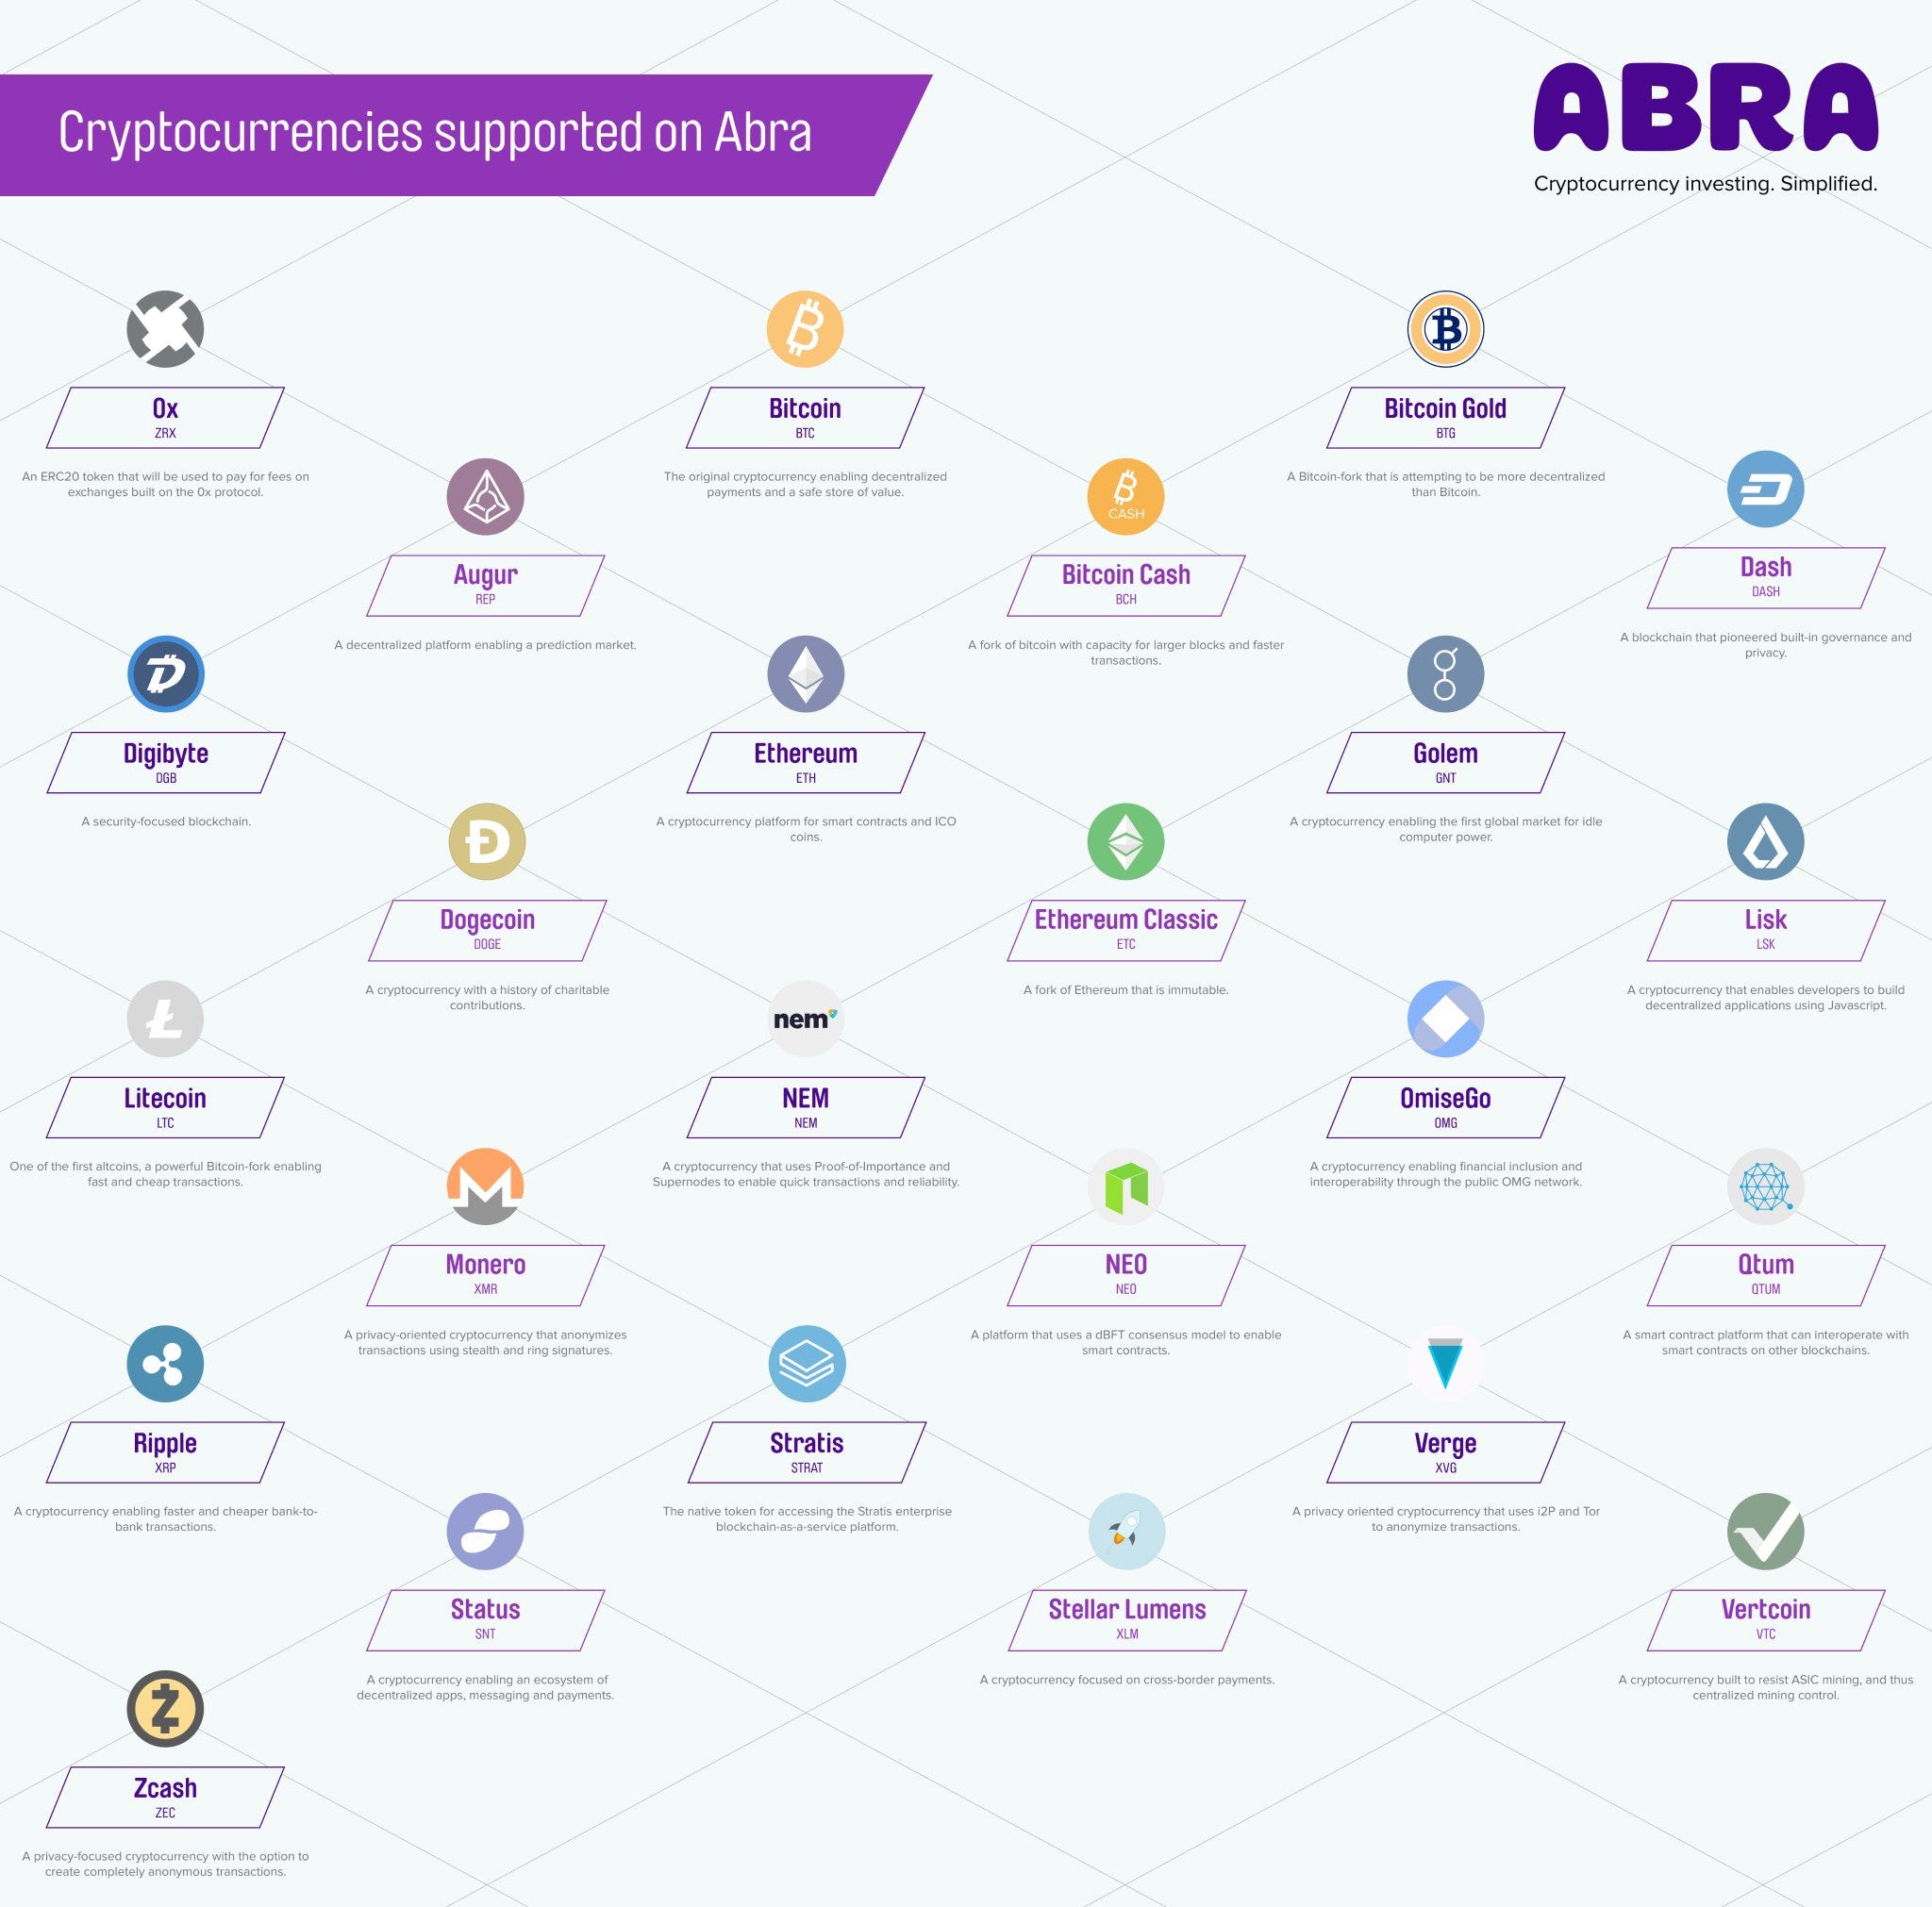 Abra’s synthetic currency platform empowers users to invest in 28 different cryptocurrencies within the user interface of a single mobile app